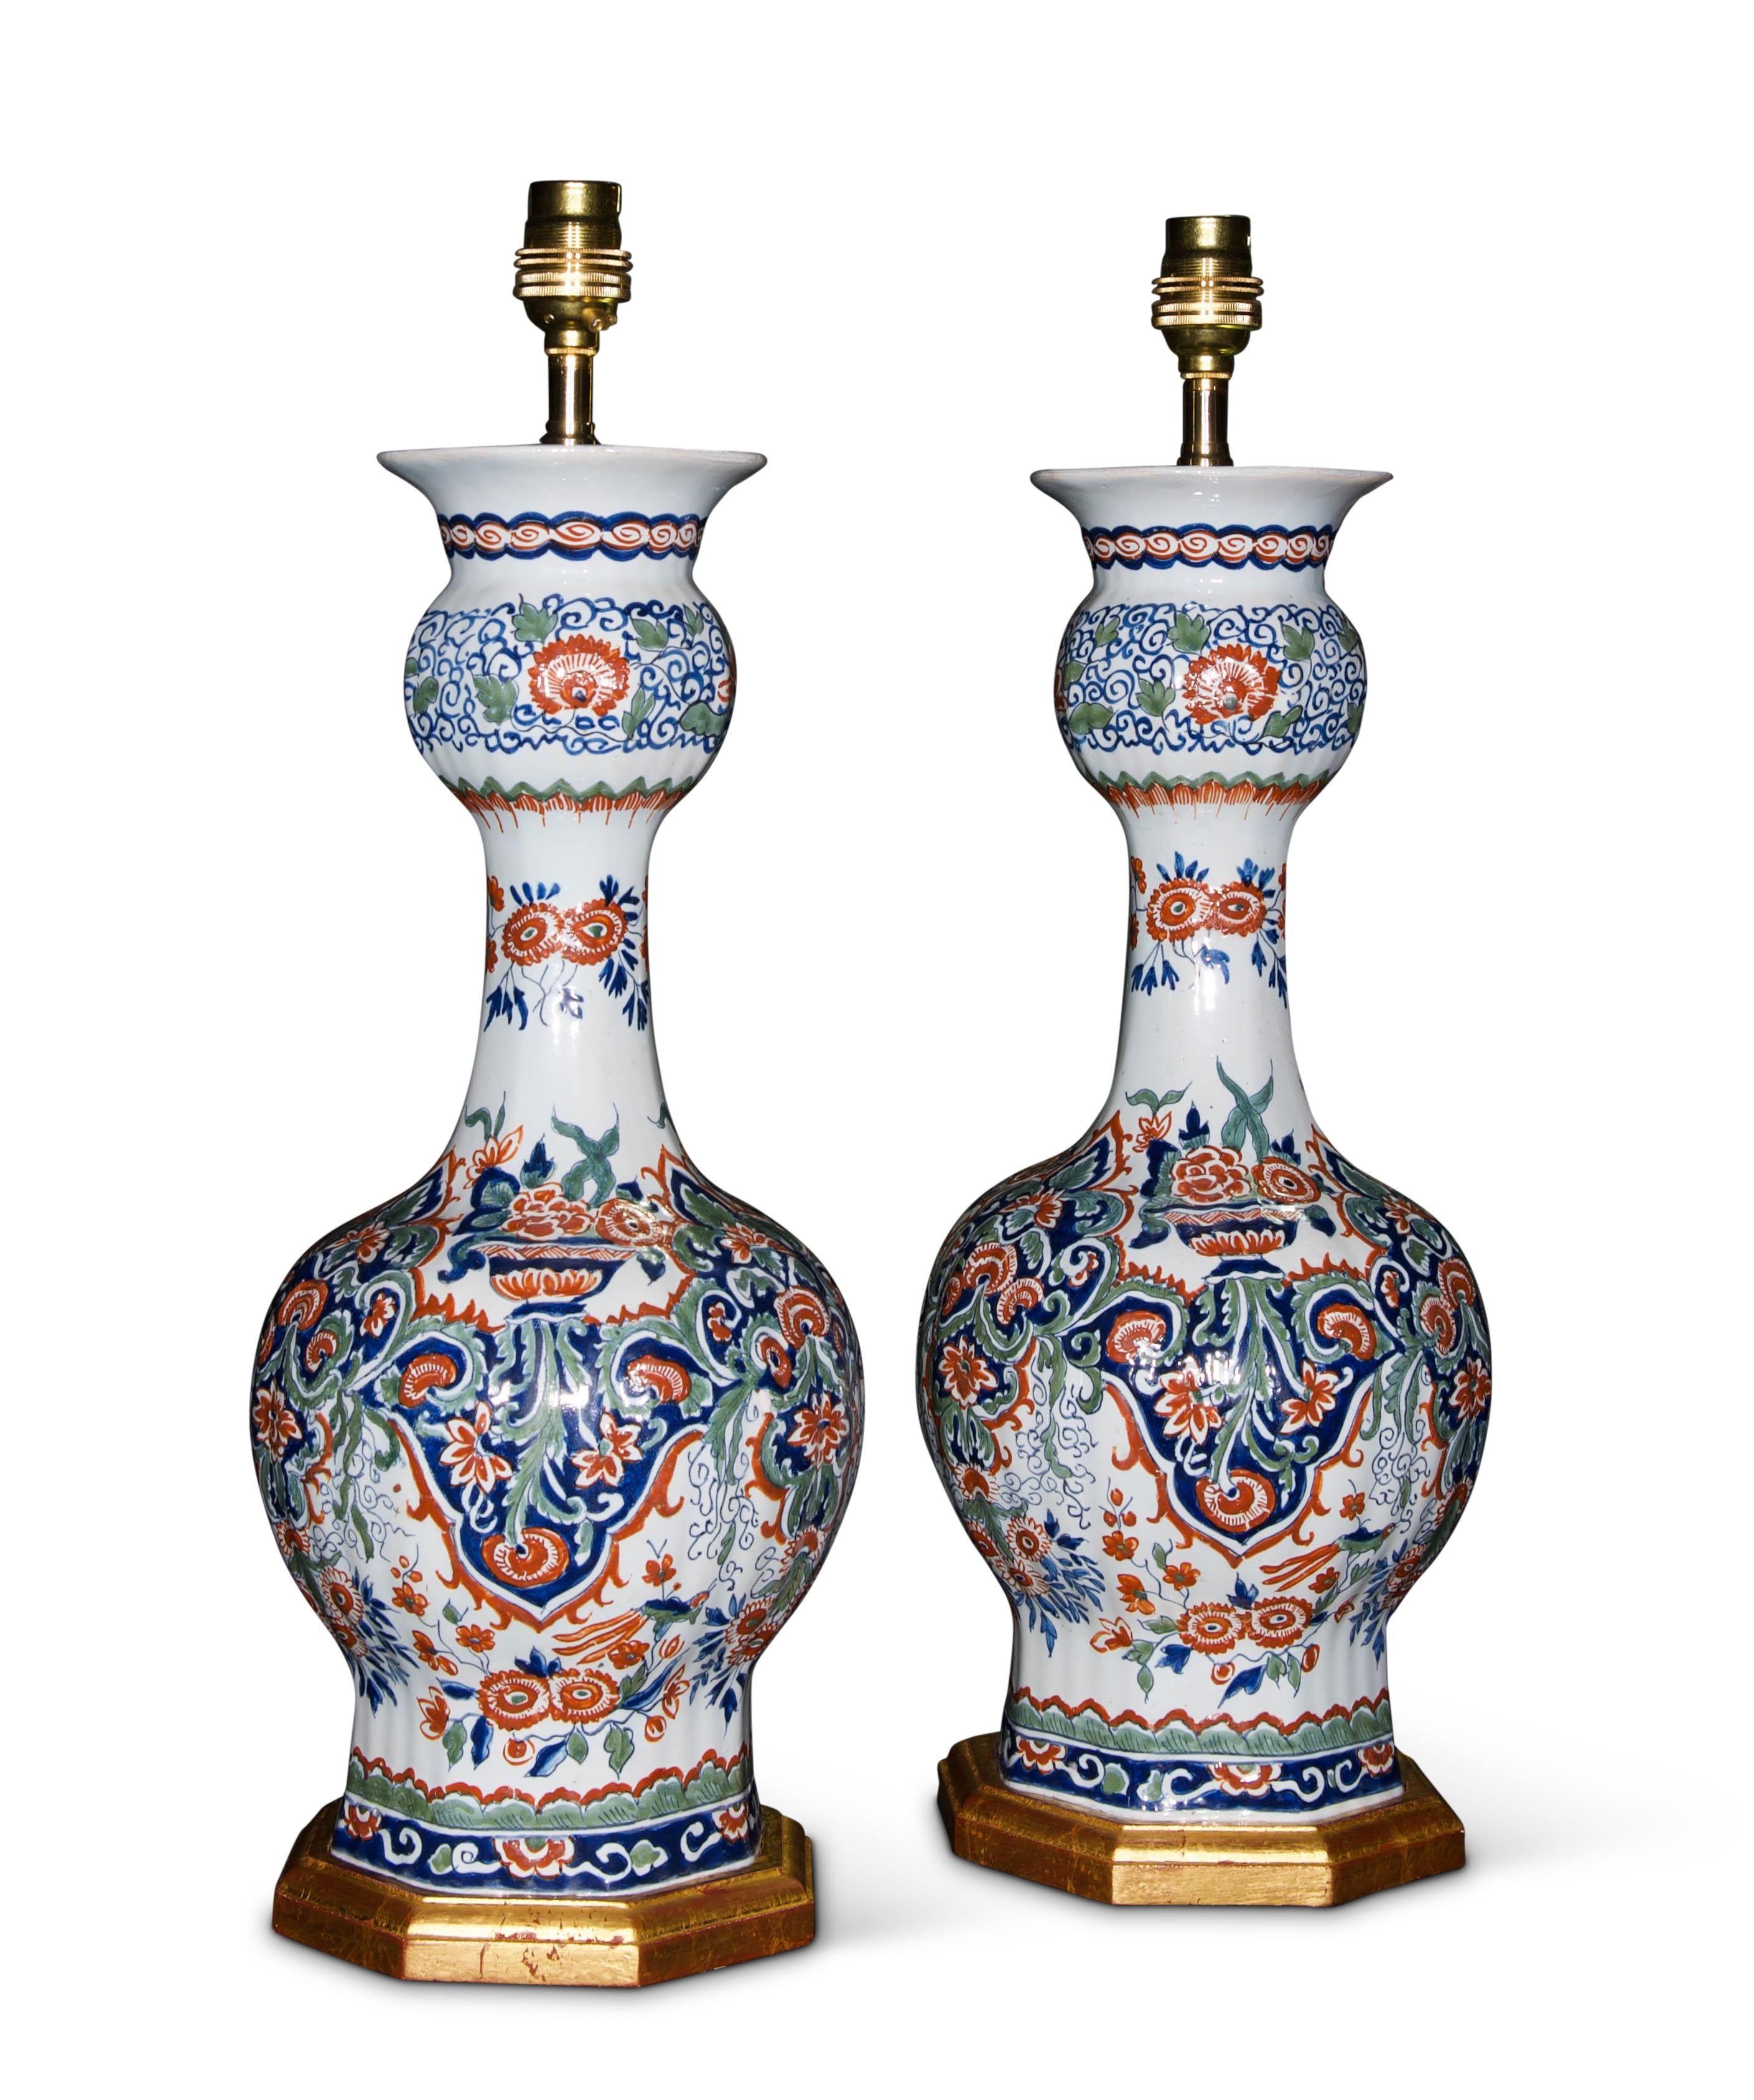 A fine pair of mid 19th century Dutch Delft vases painted in the Kashmiri palette. Of octagonal form, the decoration features stylised flowers in panels painted with colours which are soft, yet vibrant. Iron red blossoms are set in a field of cobalt